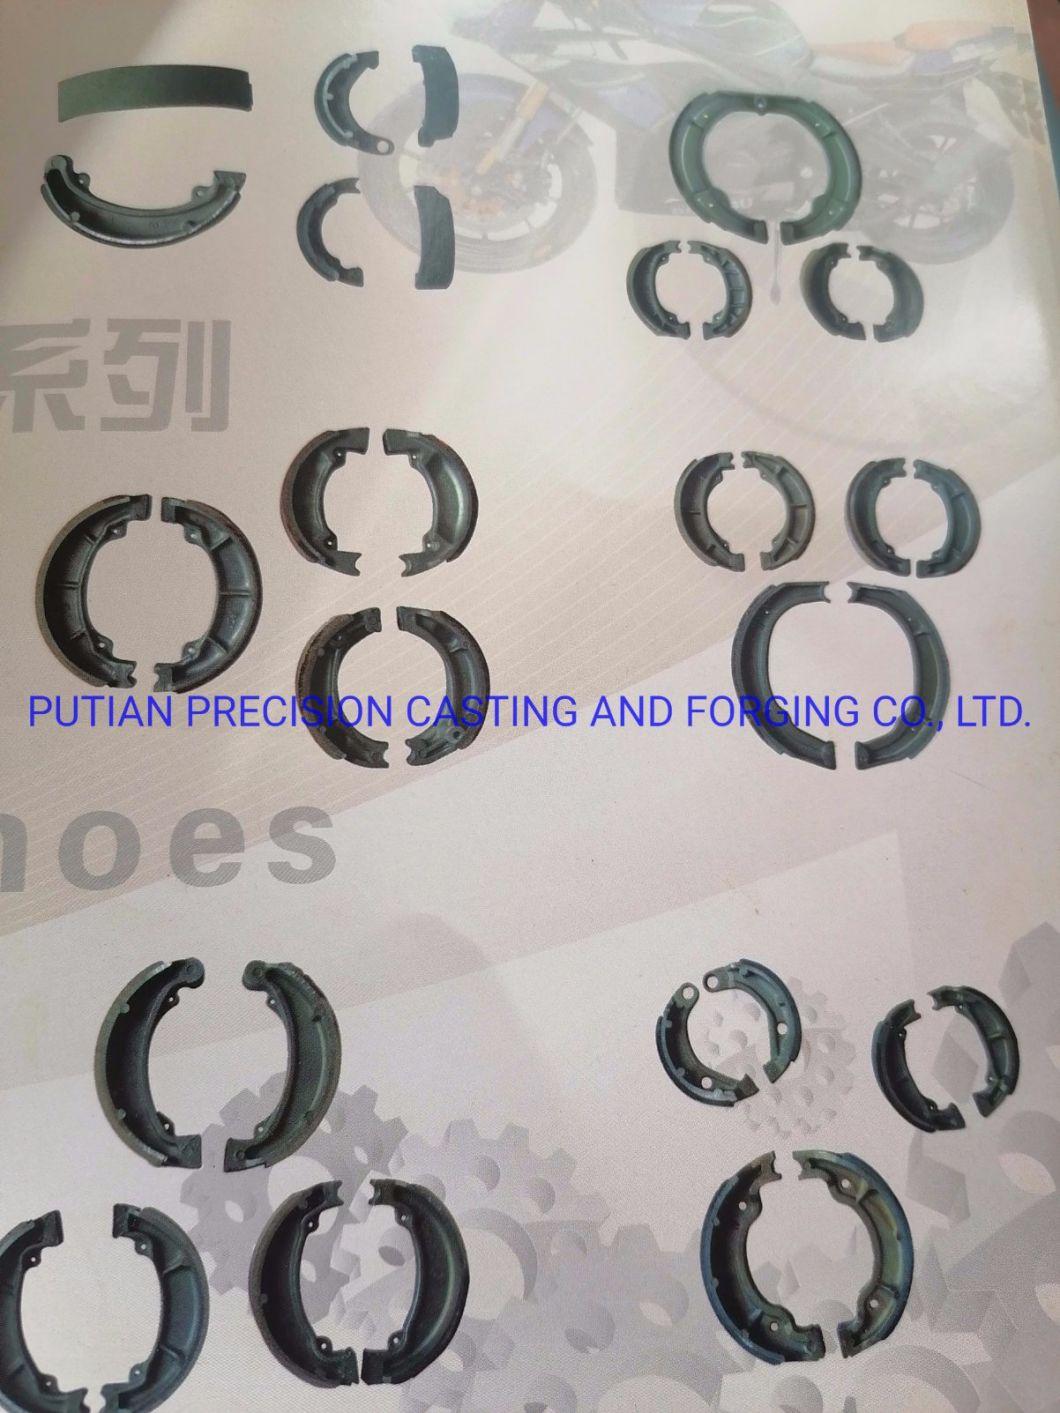 High Quality, High Wear Resistance, No Nosise Motorcycle Brake Shoes Parts, Asbestos or Asbestos Free -Yh50